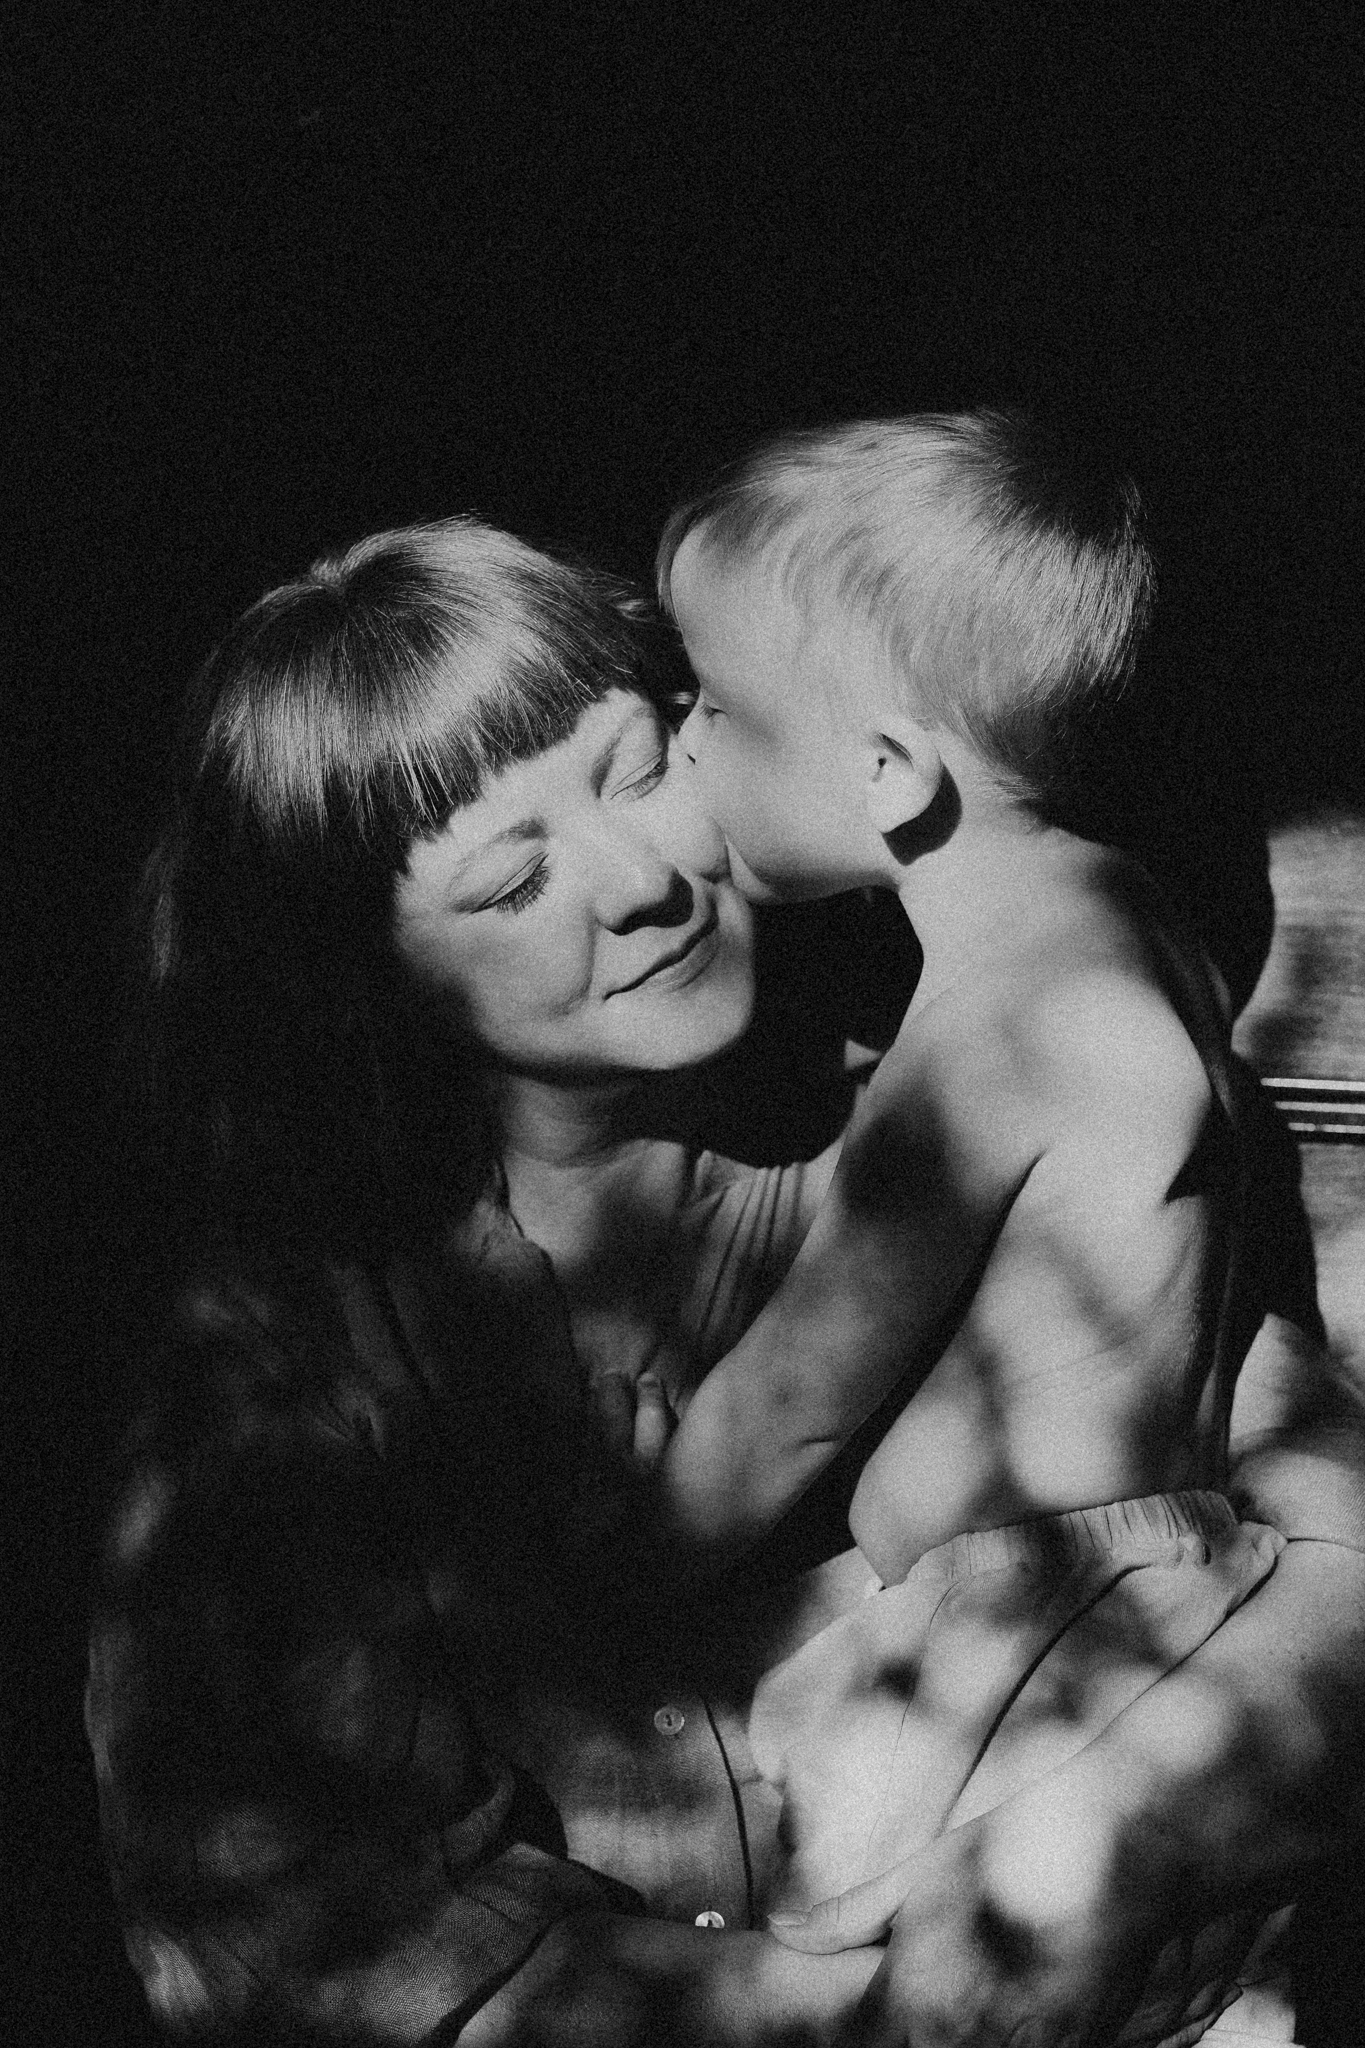 An example of family photography. Black and white photo of child kissing a mother on the cheek.